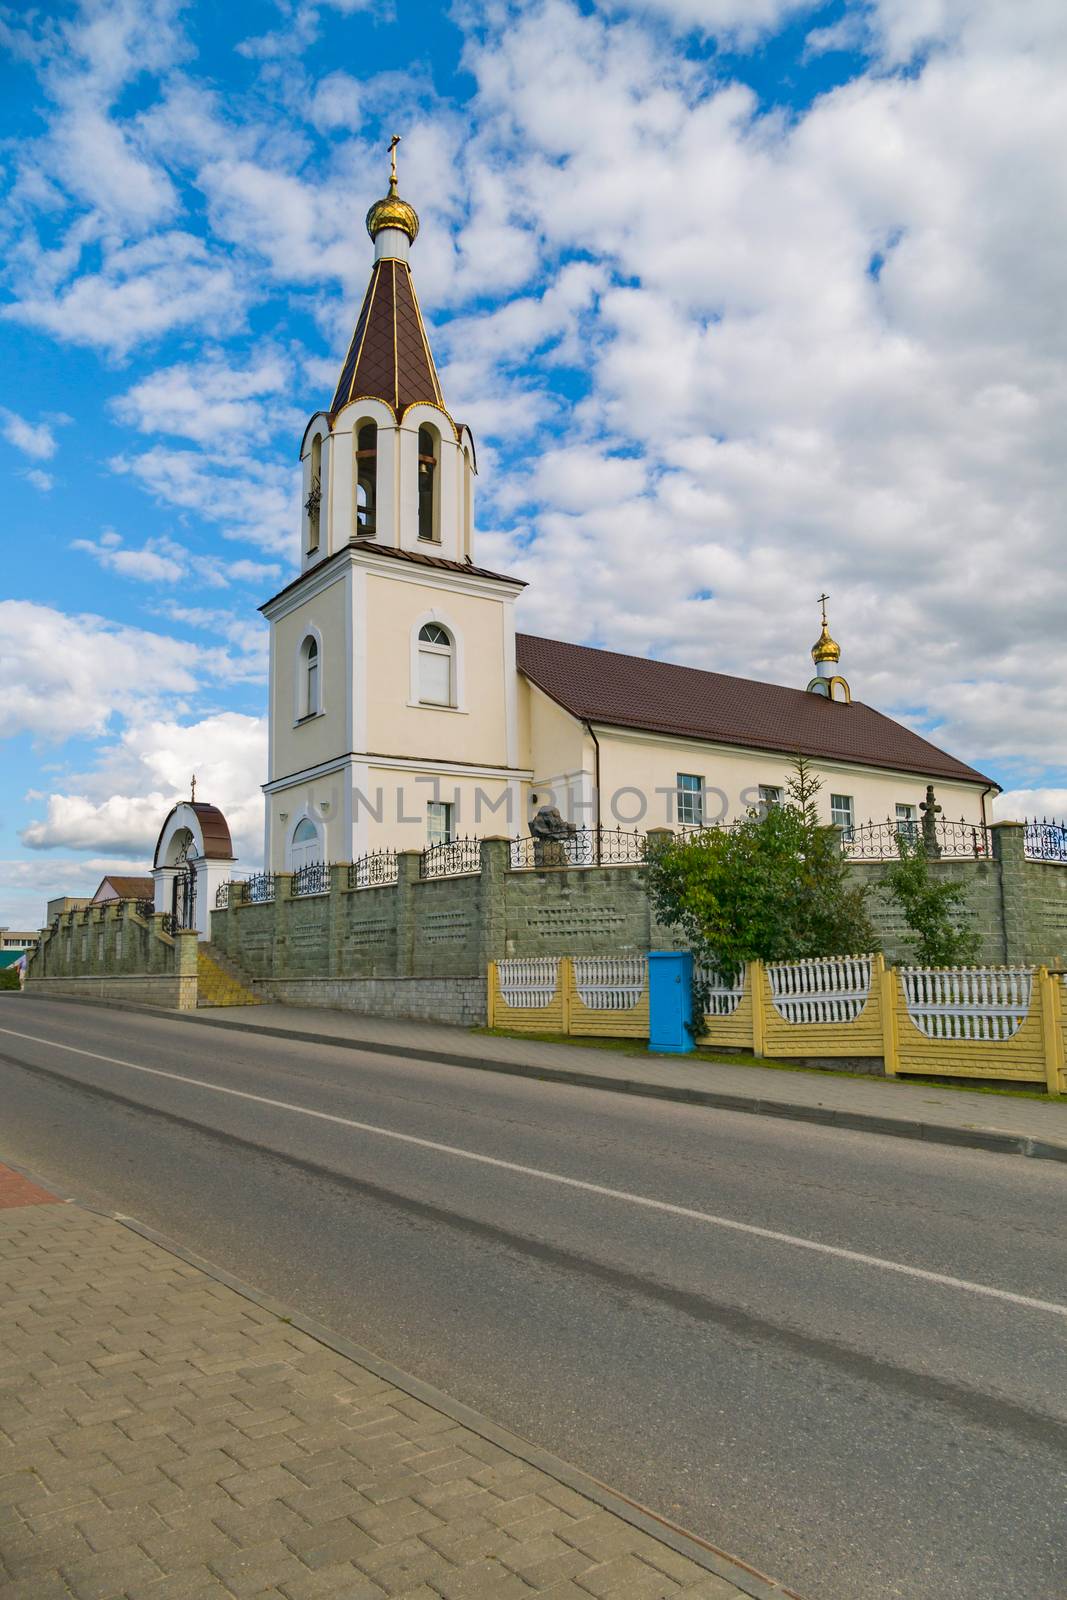 a small church surrounded by a high fence against a cloudy blue sky by Adamchuk